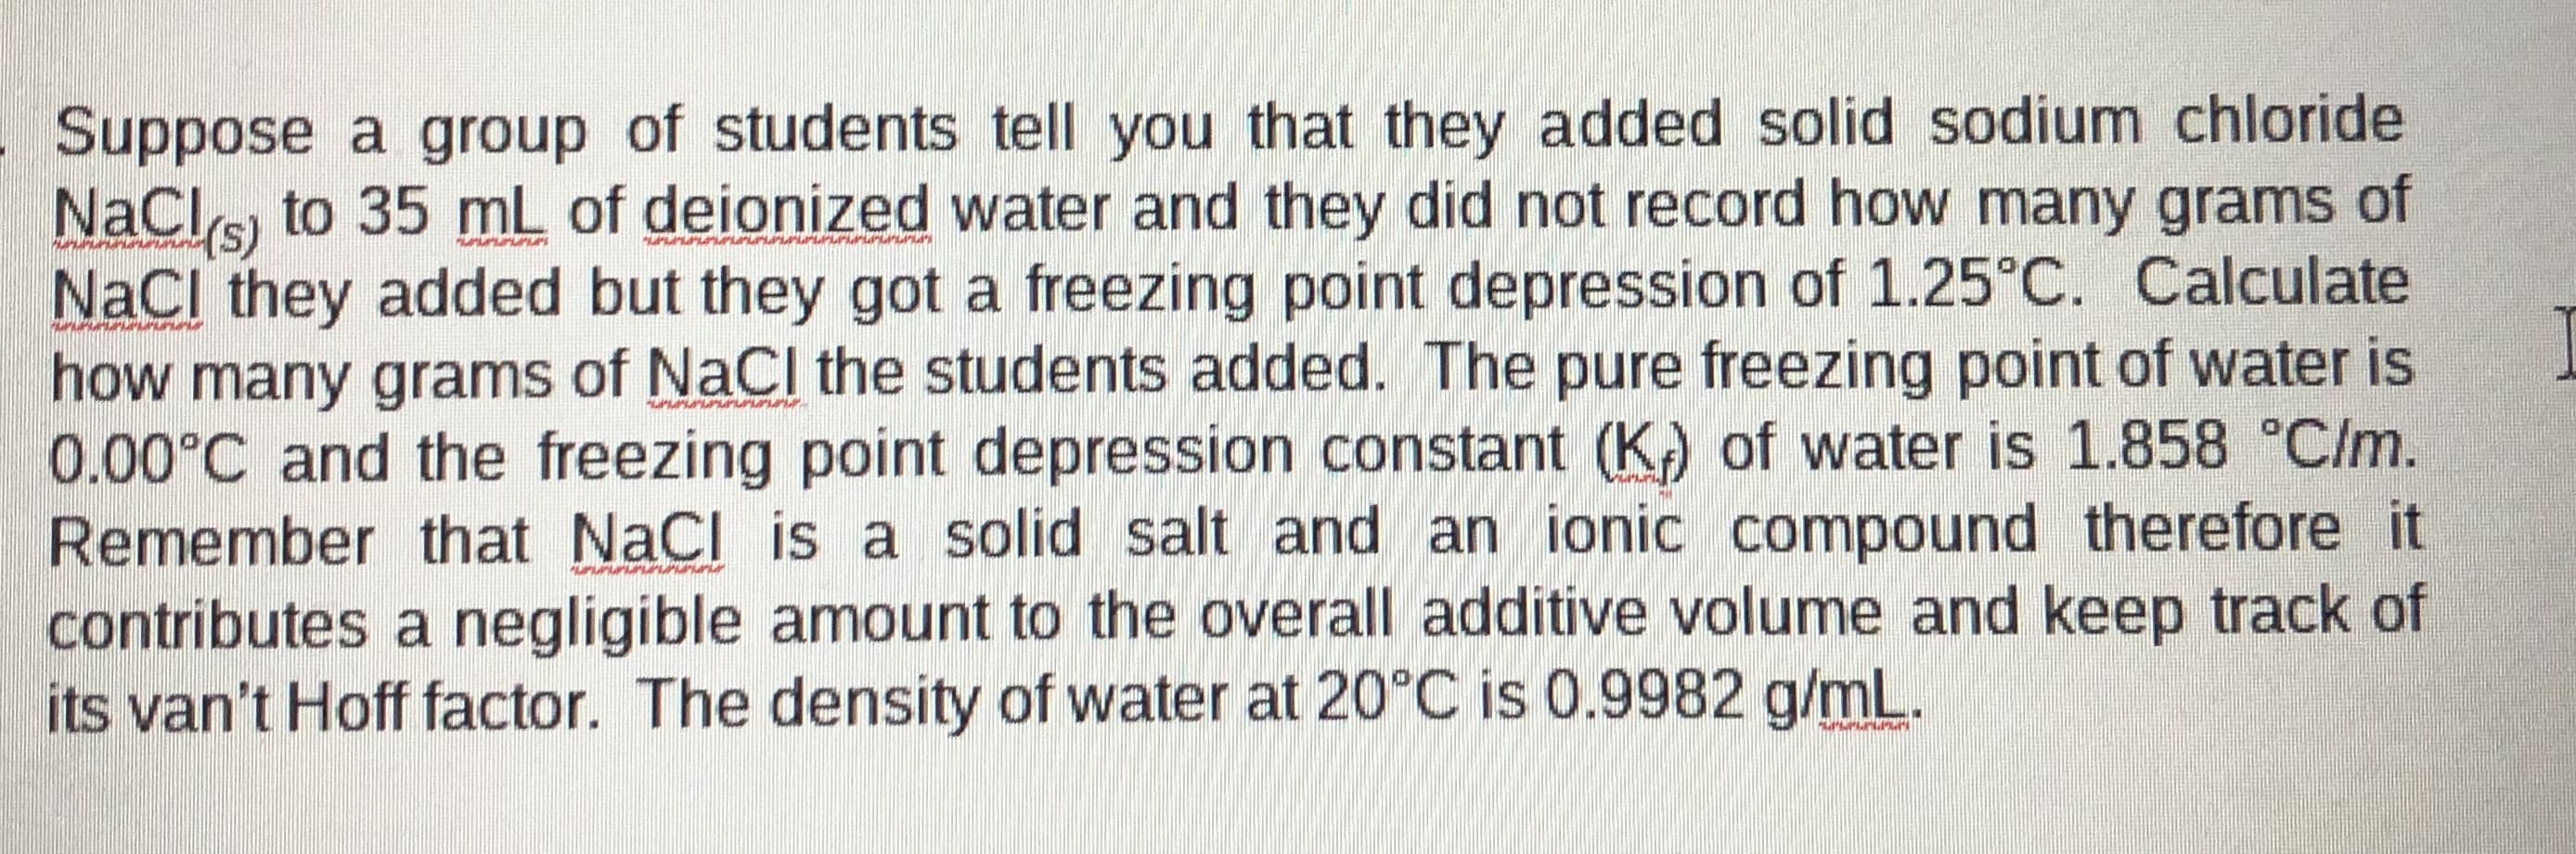 Suppose a group of students tell you that they added solid sodium chloride
NaCls to 35 mL of deionized water and they did not record how many grams of
NaCl they added but they got a freezing point depression of 1.25°C. Calculate
how many grams of NaCl the students added. The pure freezing point of water is
0.00°C and the freezing point depression constant (K) of water is 1.858 °C/m.
Remember that NaCl is a solid salt and an ionic compound therefore it
contributes a negligible amount to the overall additive volume and keep track of
its van't Hoff factor. The density of water at 20°C is 0.9982 g/mL.
